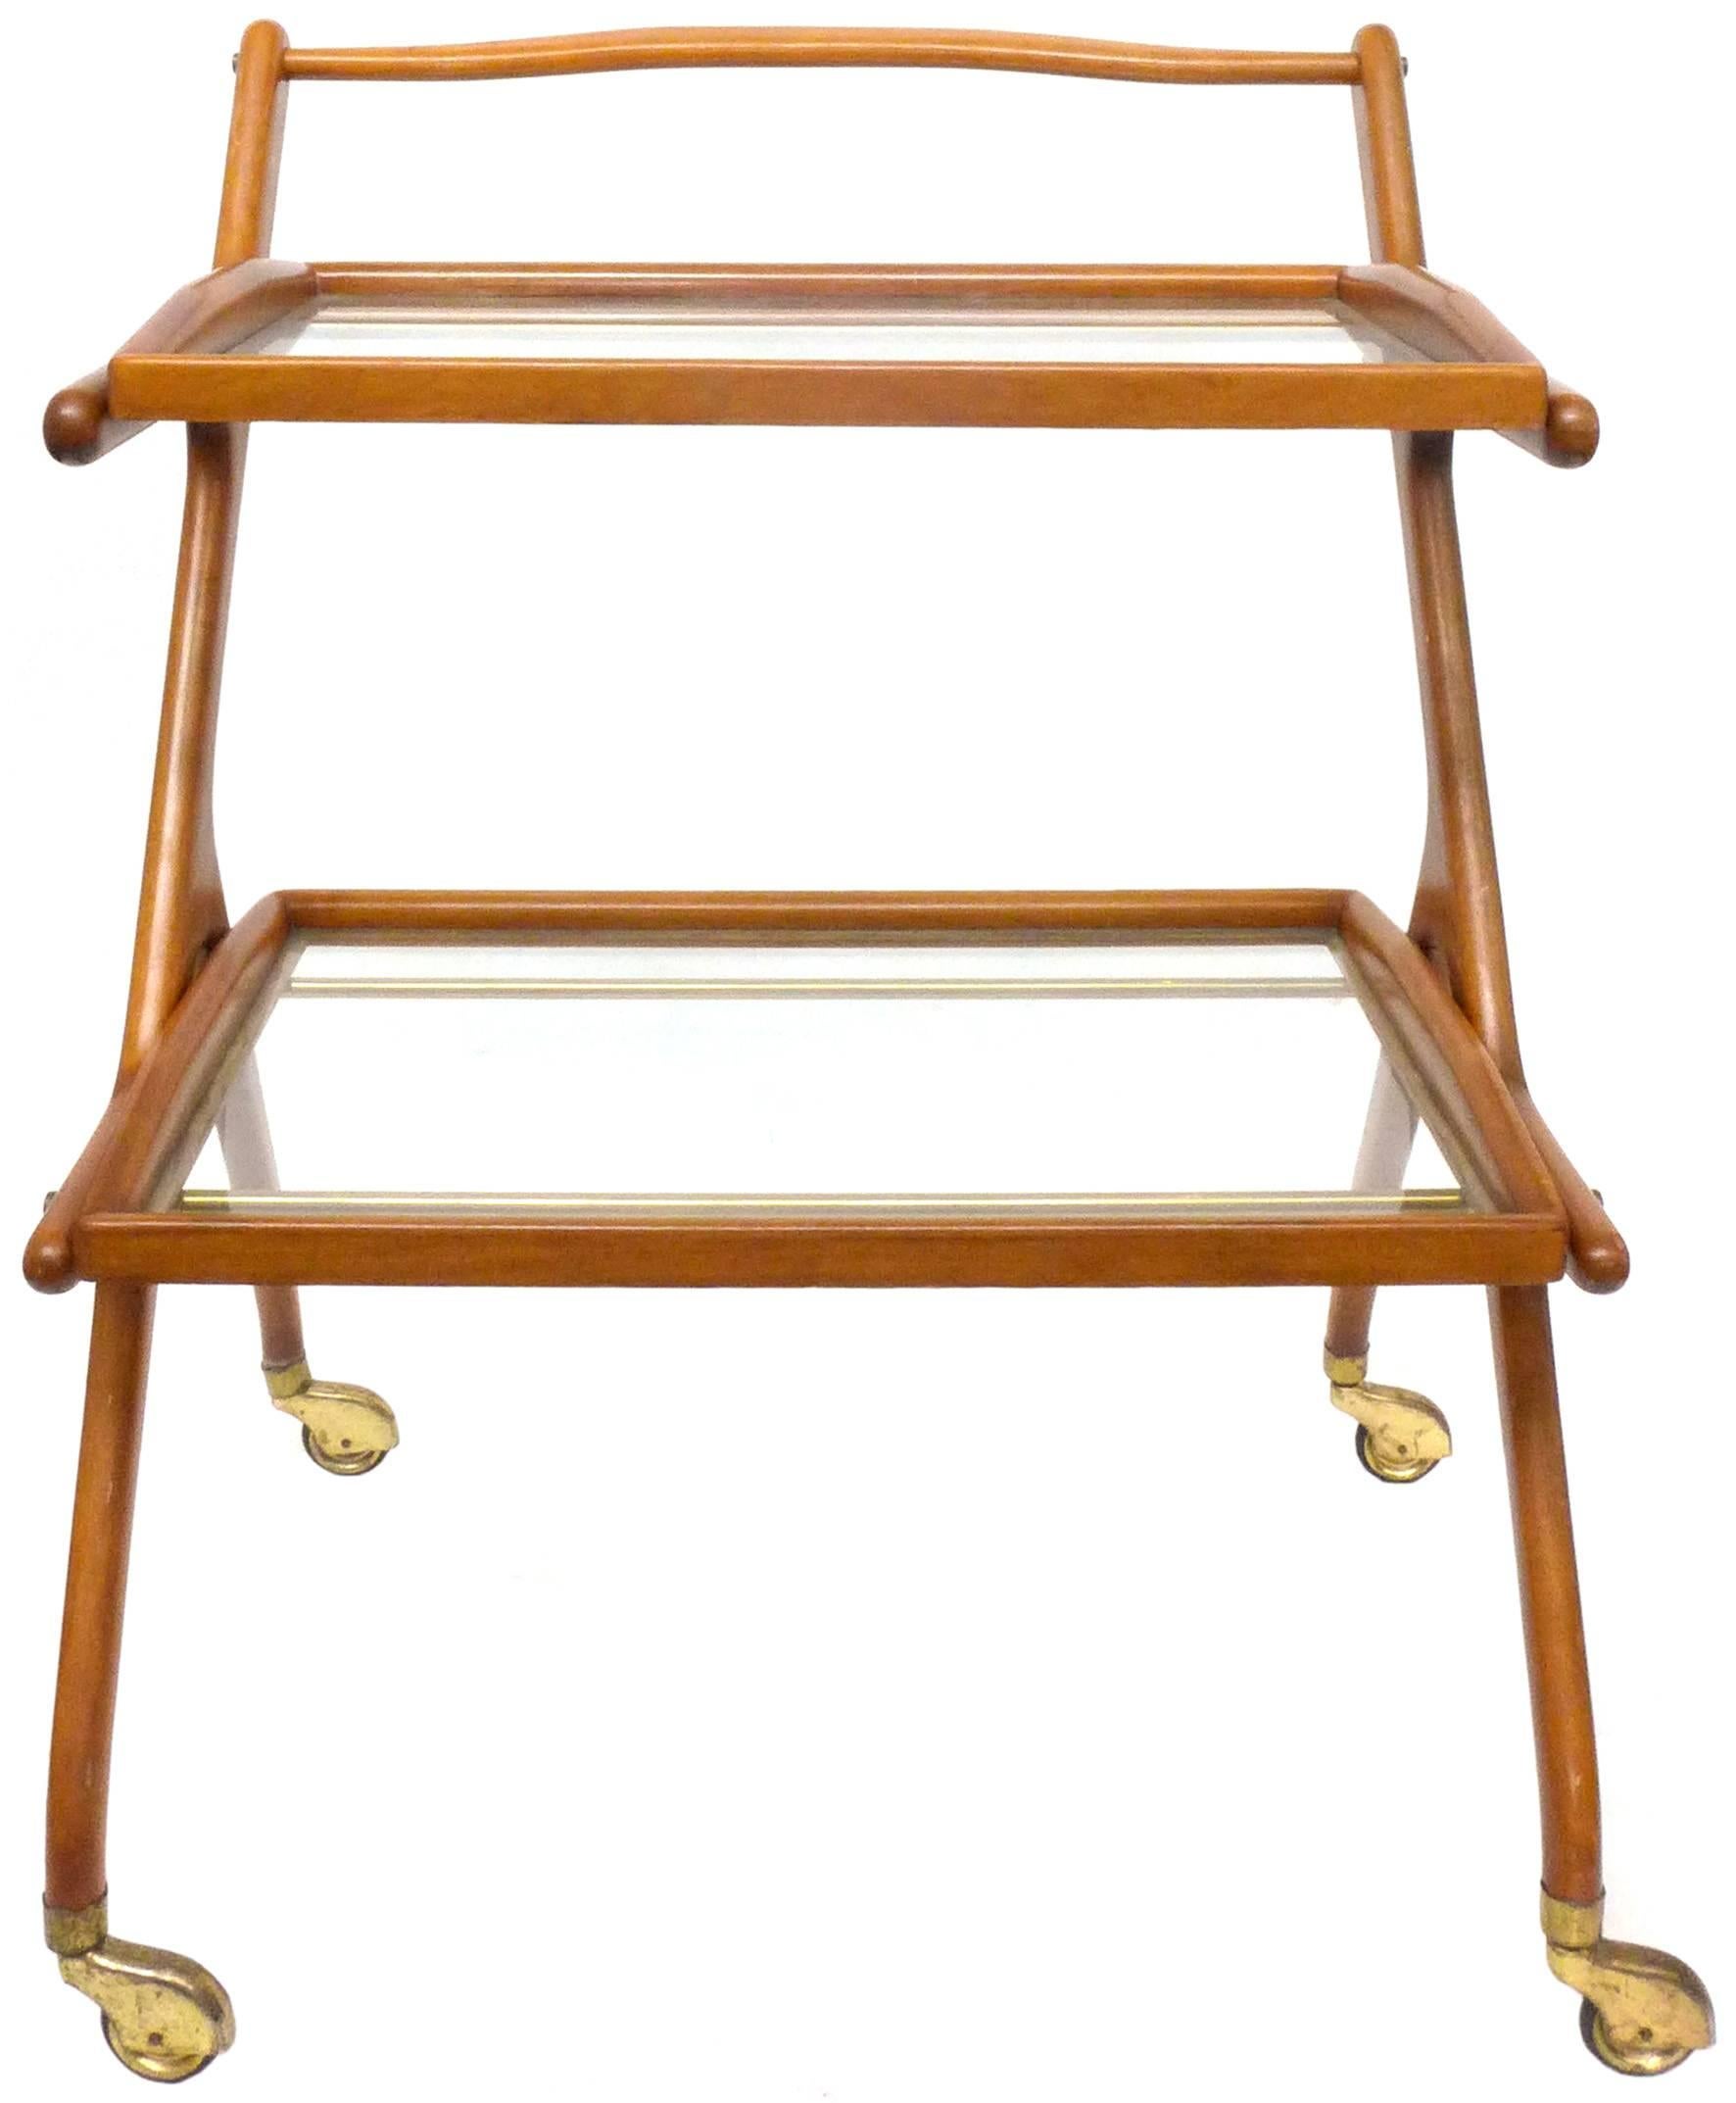 A wonderful 1950s Italian walnut, brass and glass bar cart by Cesare Lacca. A perfect example of Classic, Mid-Century Italian design in wonderful, near perfect, all original condition. An exceptionally decorative and sculptural utilitarian item.